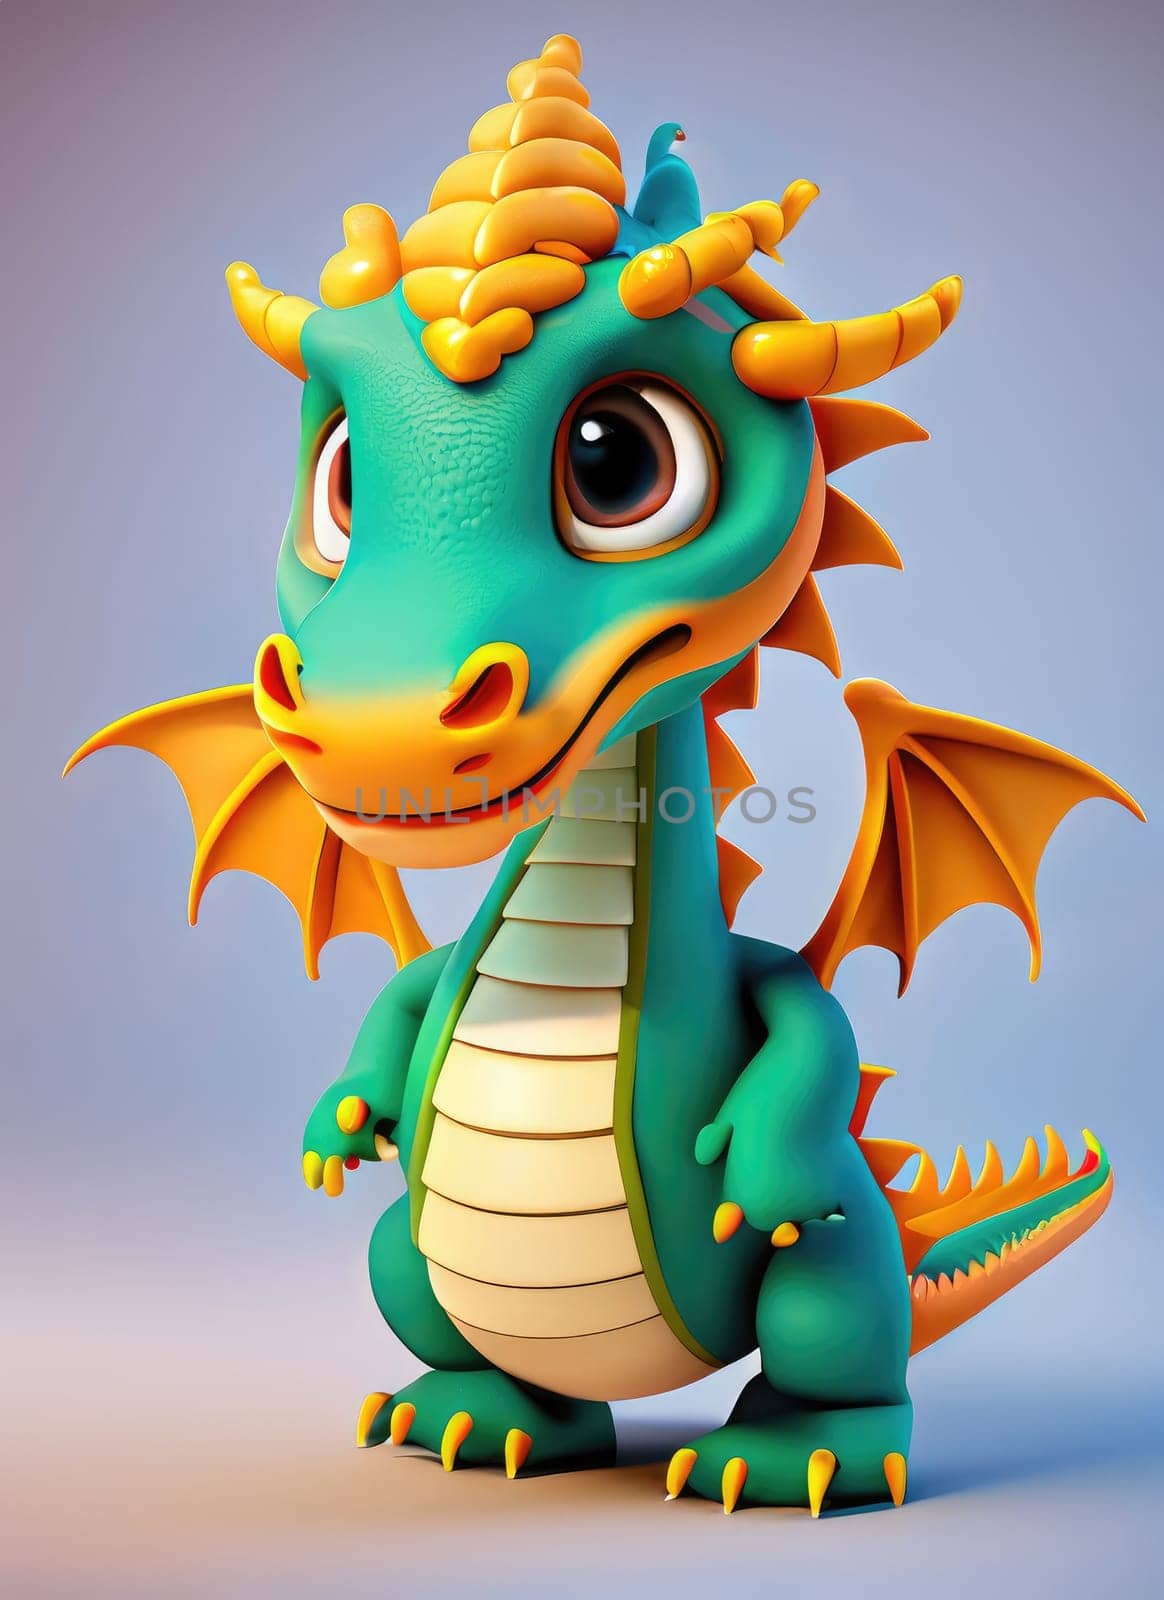 A Kawaii Baby Dragon. Bright and colorful 3D render computer generated. Adorable dragon baby with large eyes and realistic scales by PeaceYAY